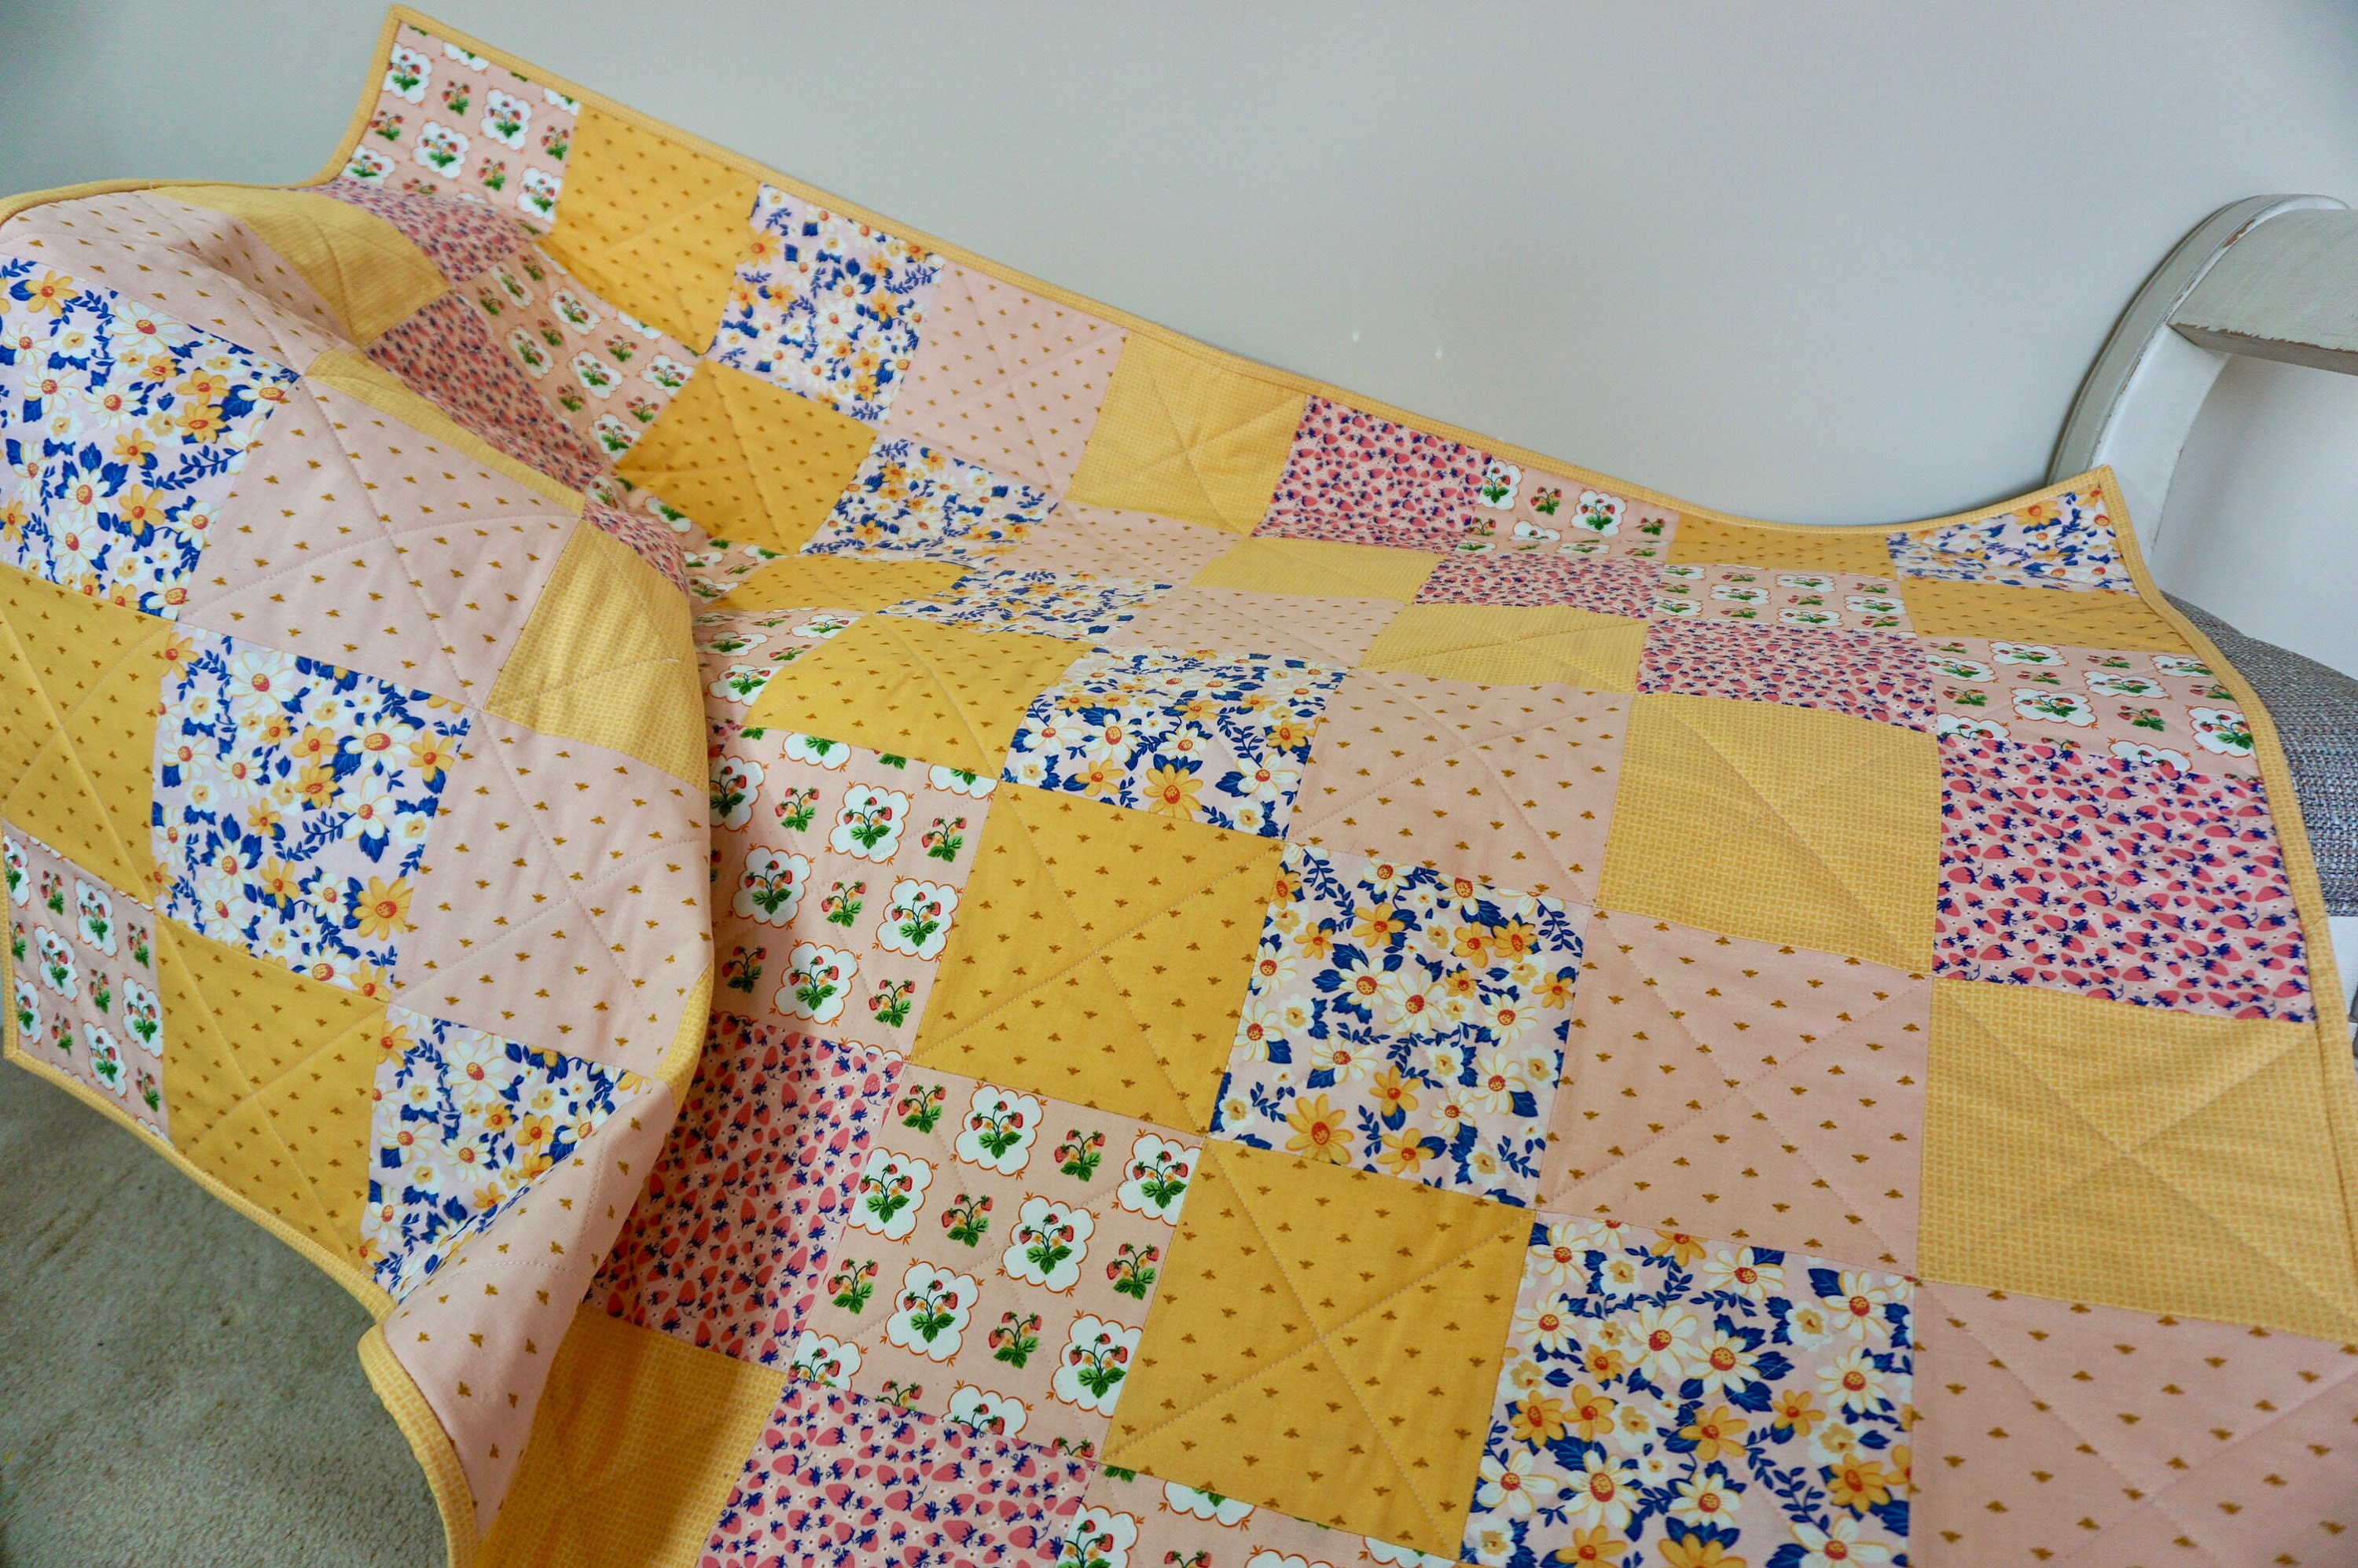 Handmade Baby Patchwork Quilt/Summer Picnic Yellow Peach Baby Quilt/Baby Toddler Blanket/Baby Shower Gift